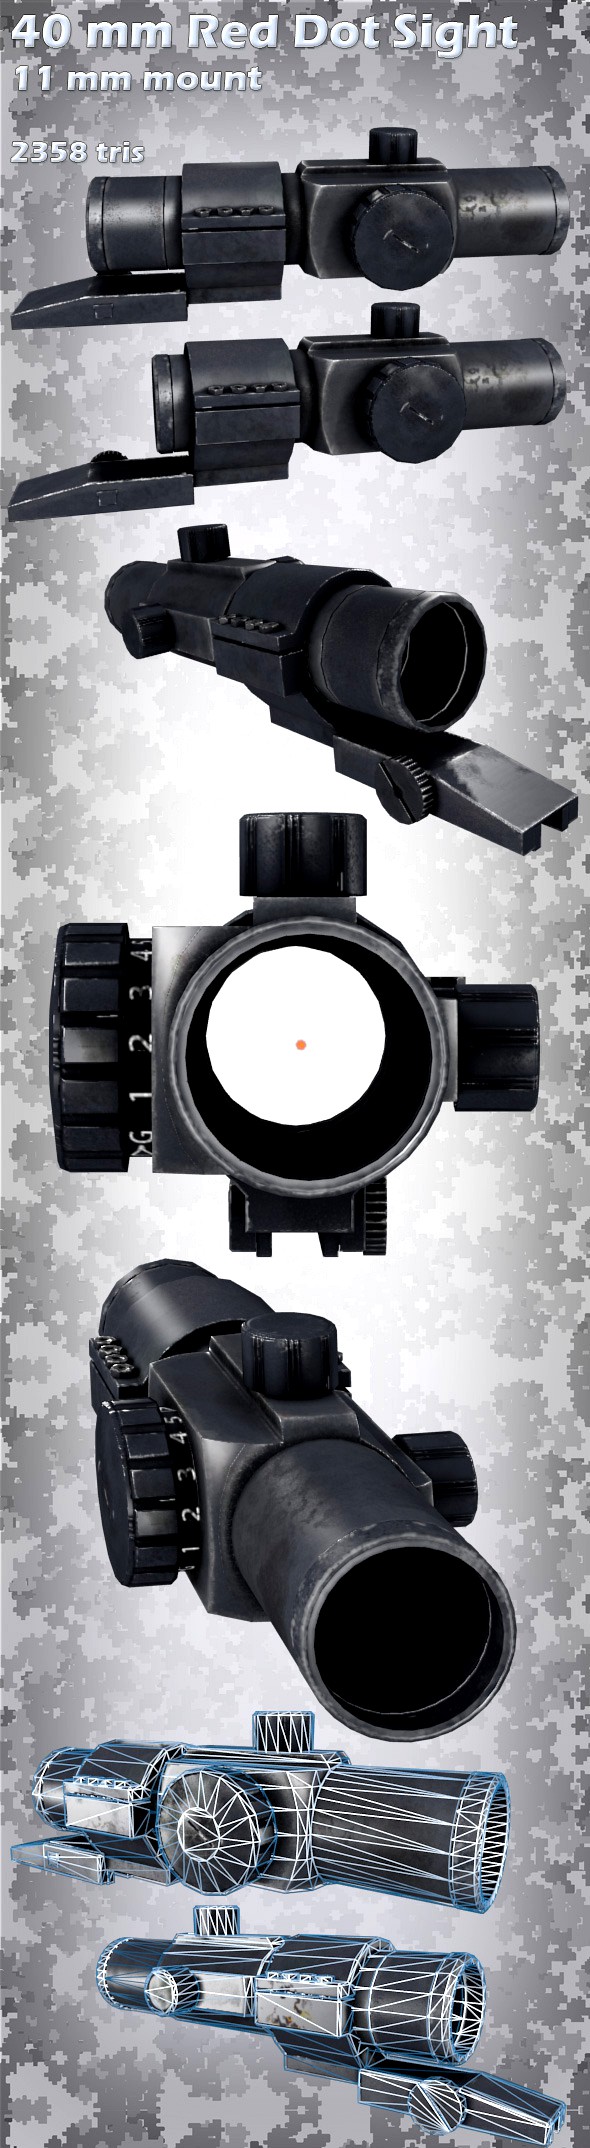 40mm Red Dot Sight with 11mm mount